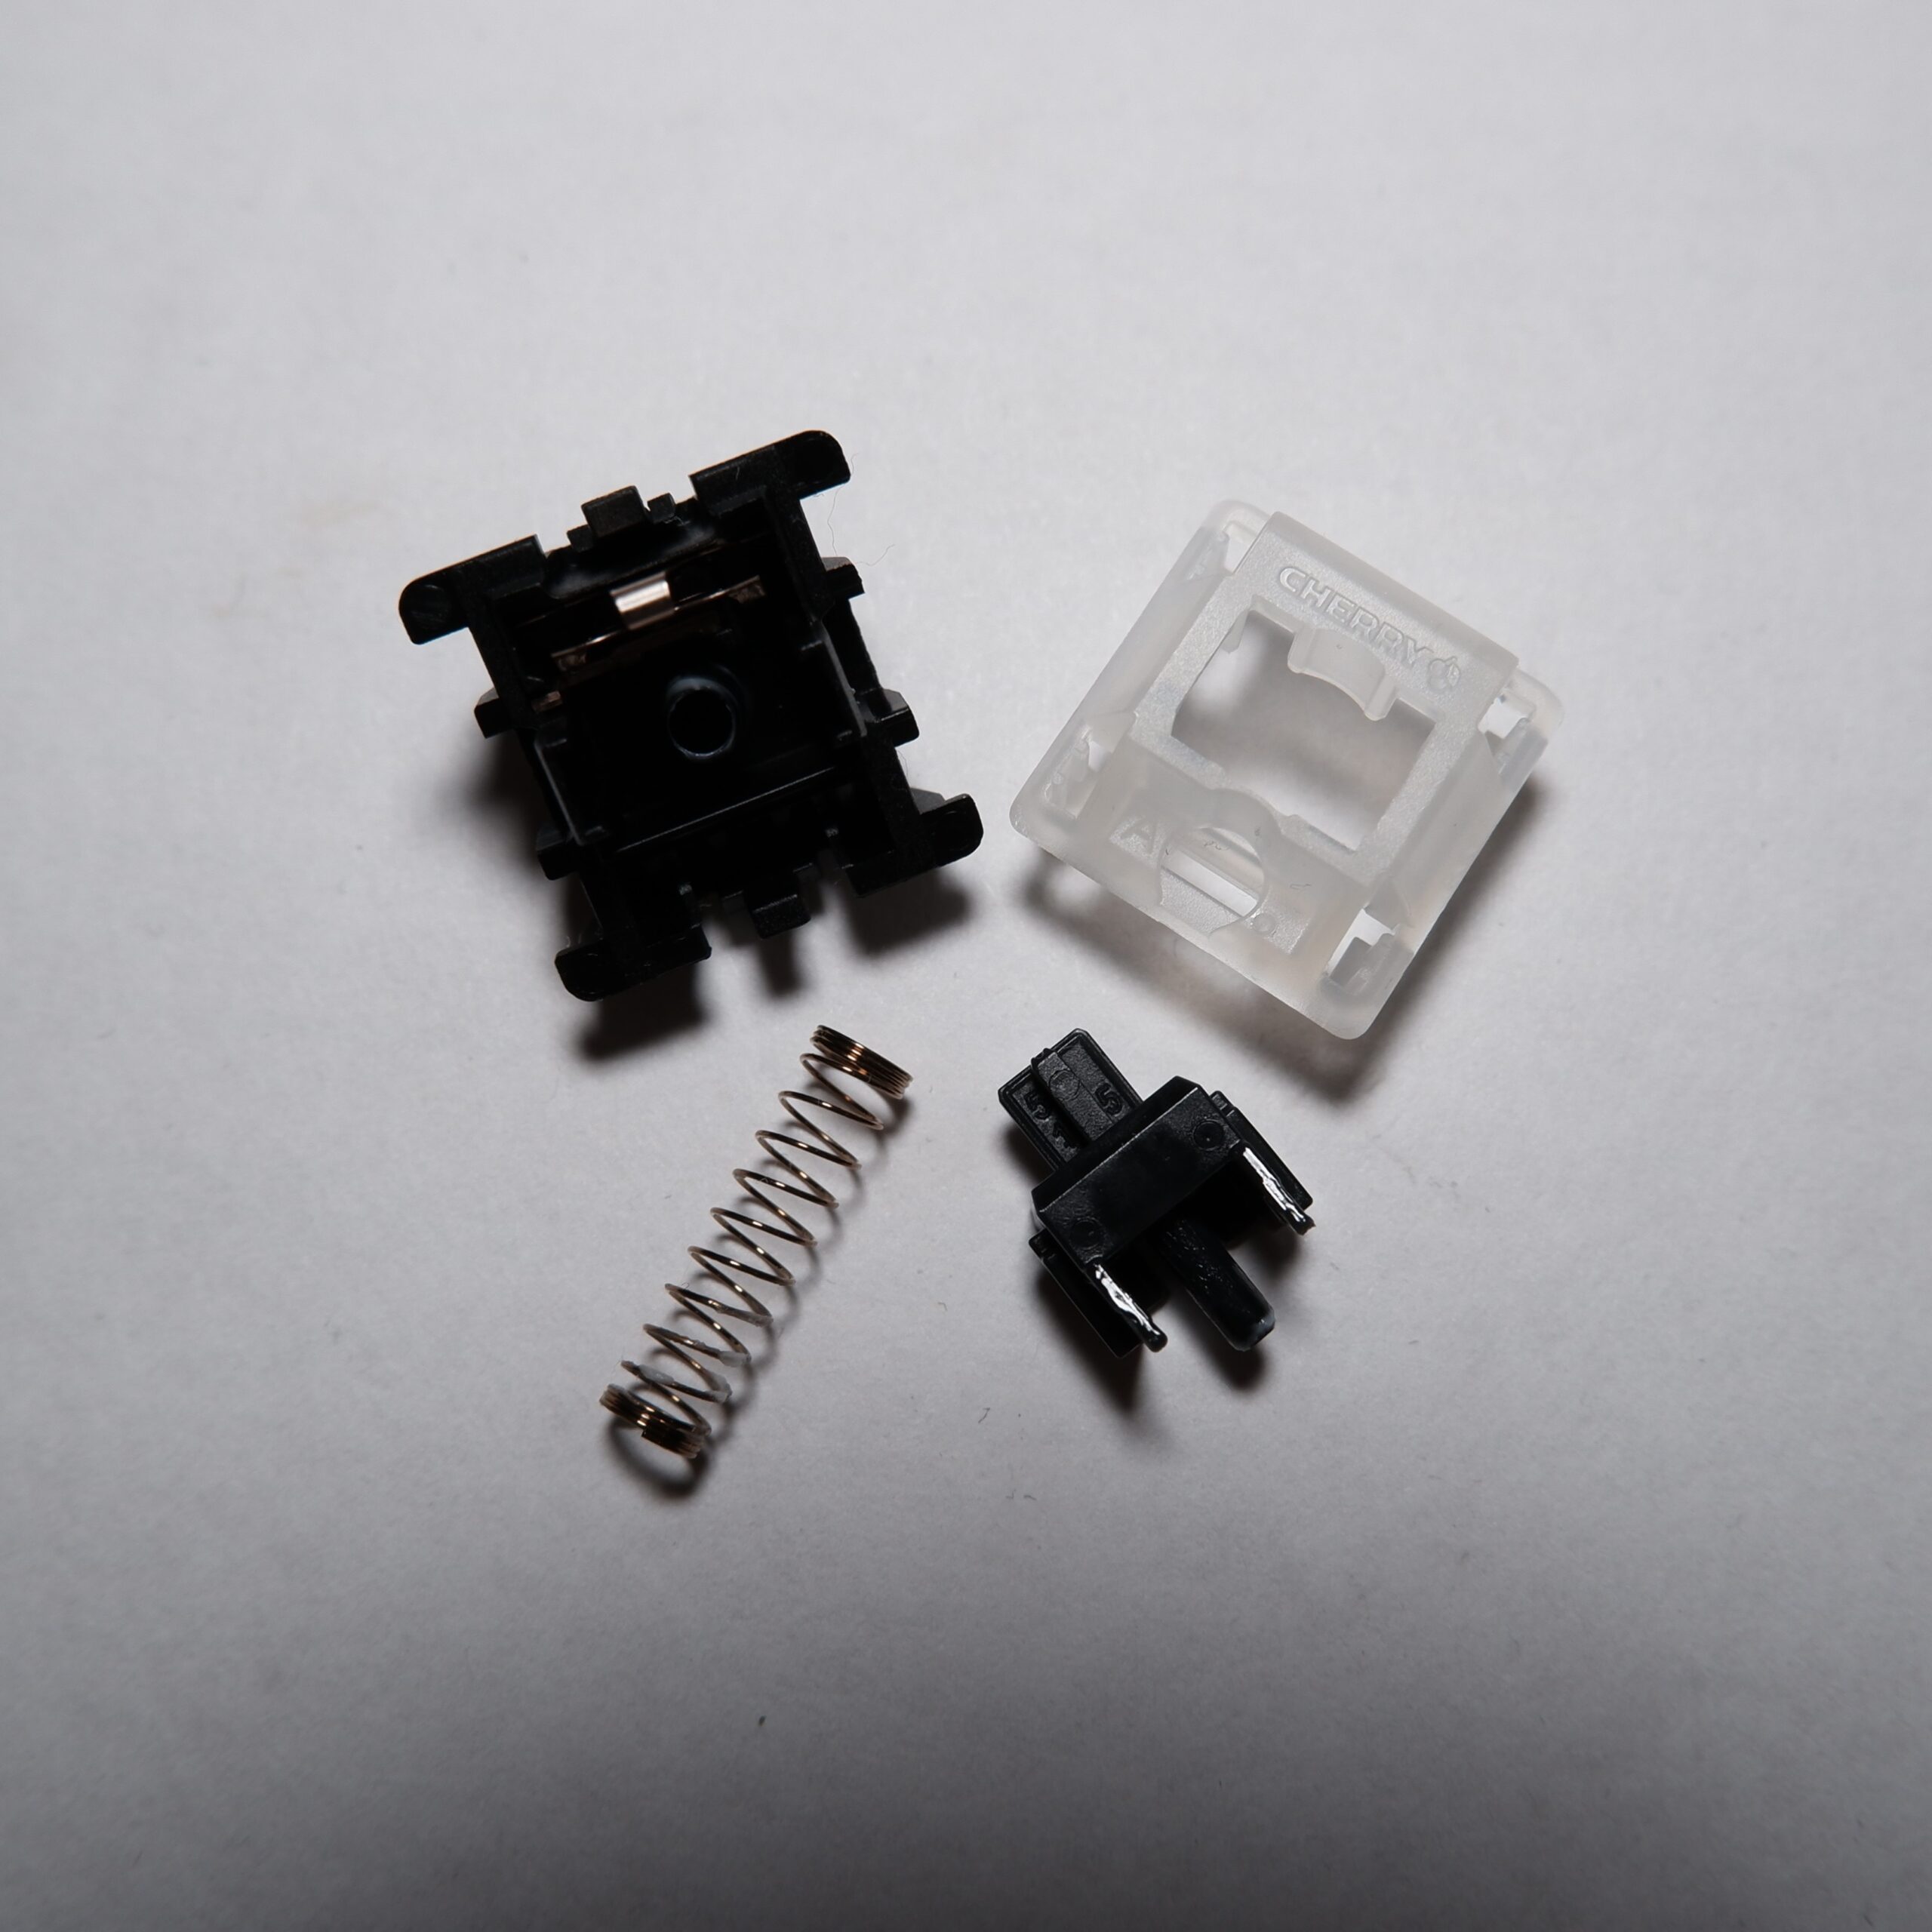 Cherry MX Black (Clear-Top) switch disassembled